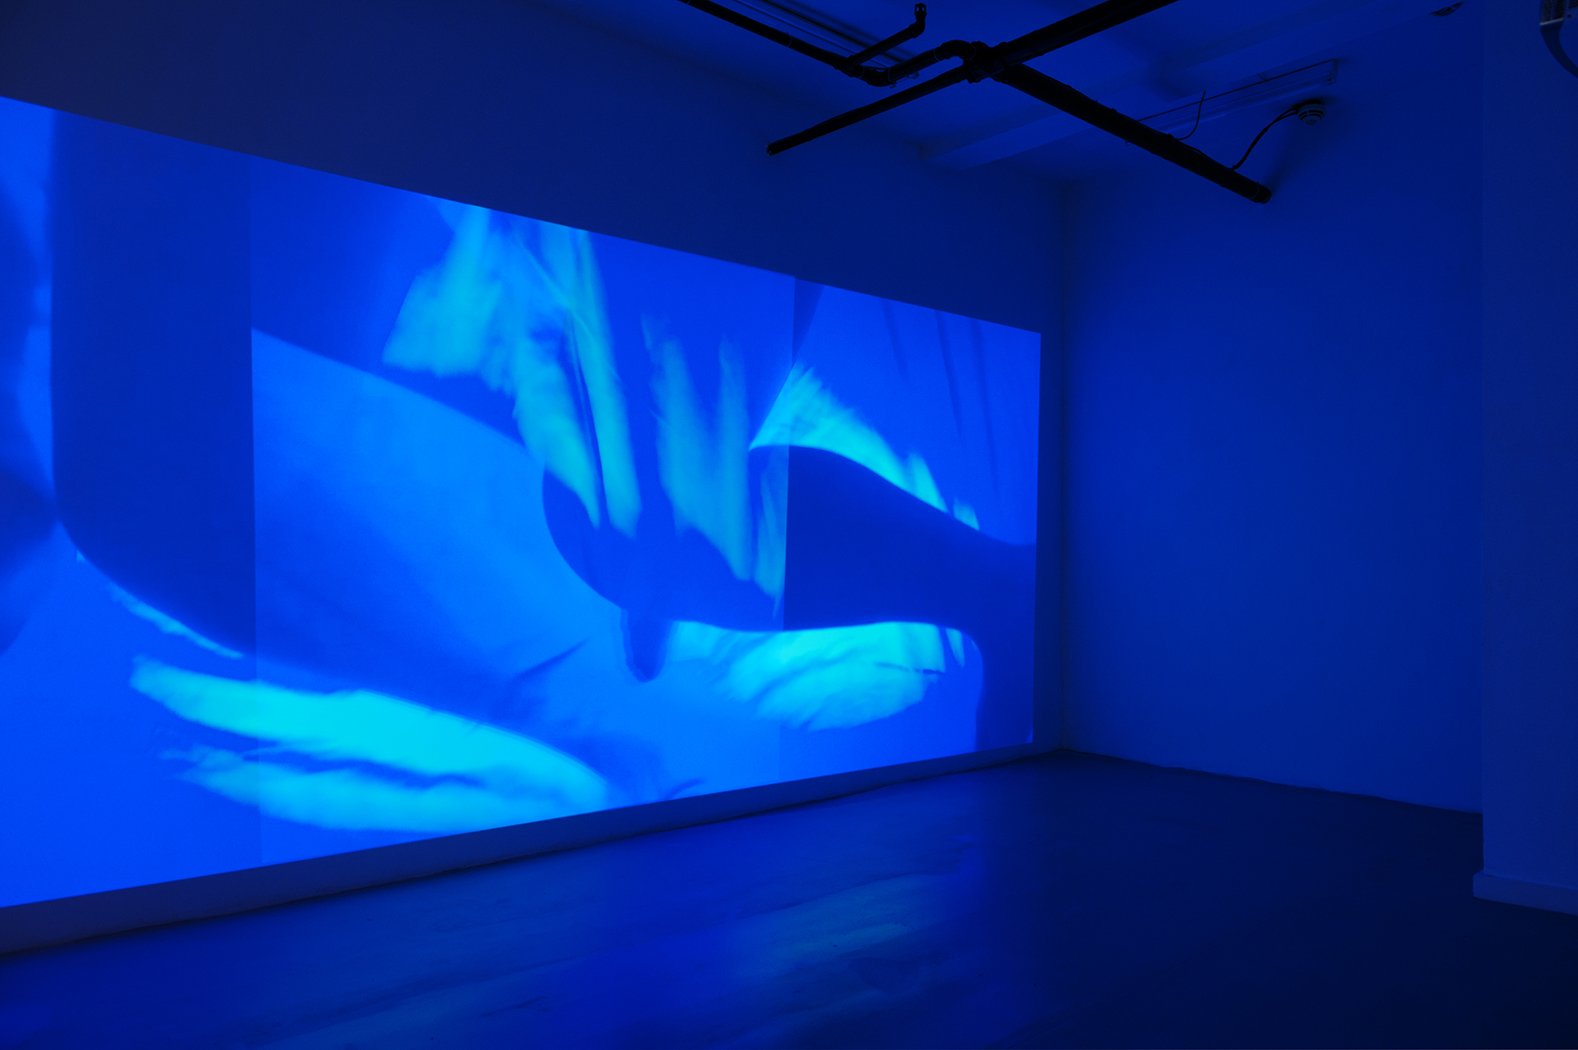 A large projection of abstract and wavy shapes in shades of blue fills the entire wall. The dark room is dimly lit by the blue glow of the projection.